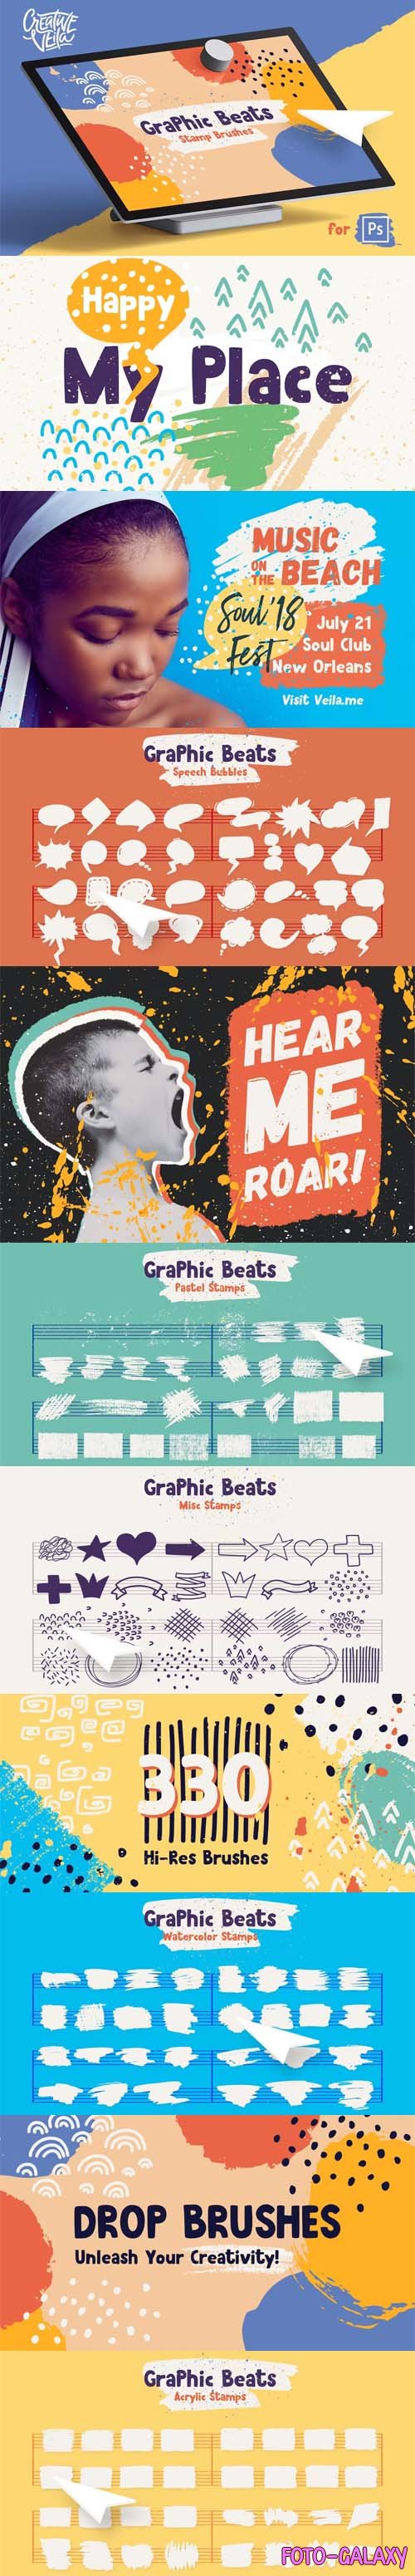 330 Graphic Beat Brushes for Photoshop